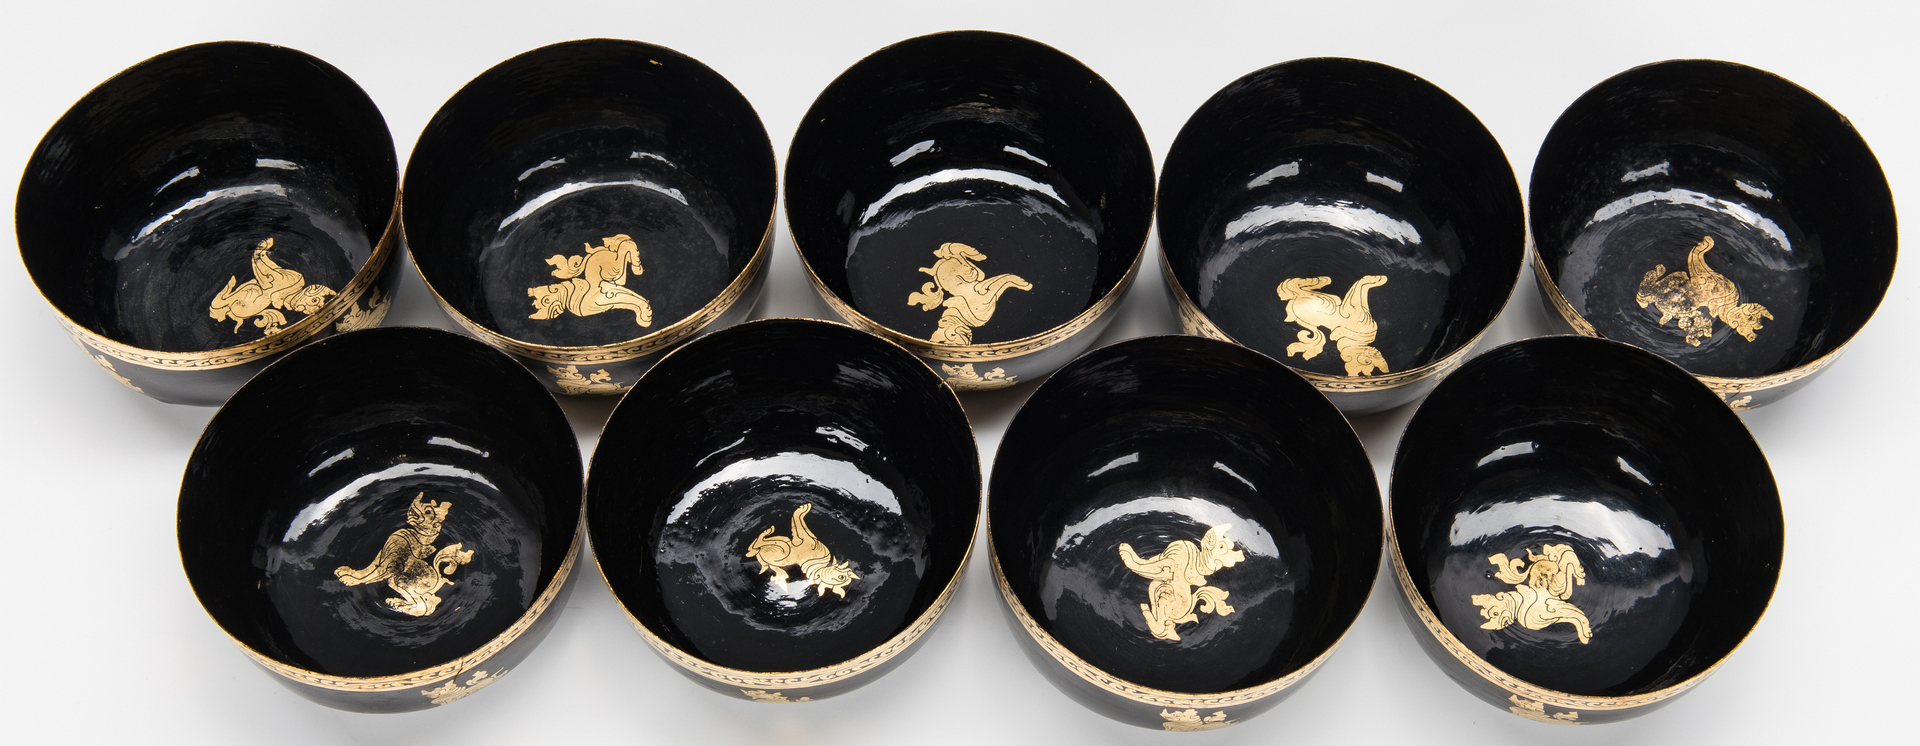 Lot 498: 27 Assorted Asian Lacquerware Items